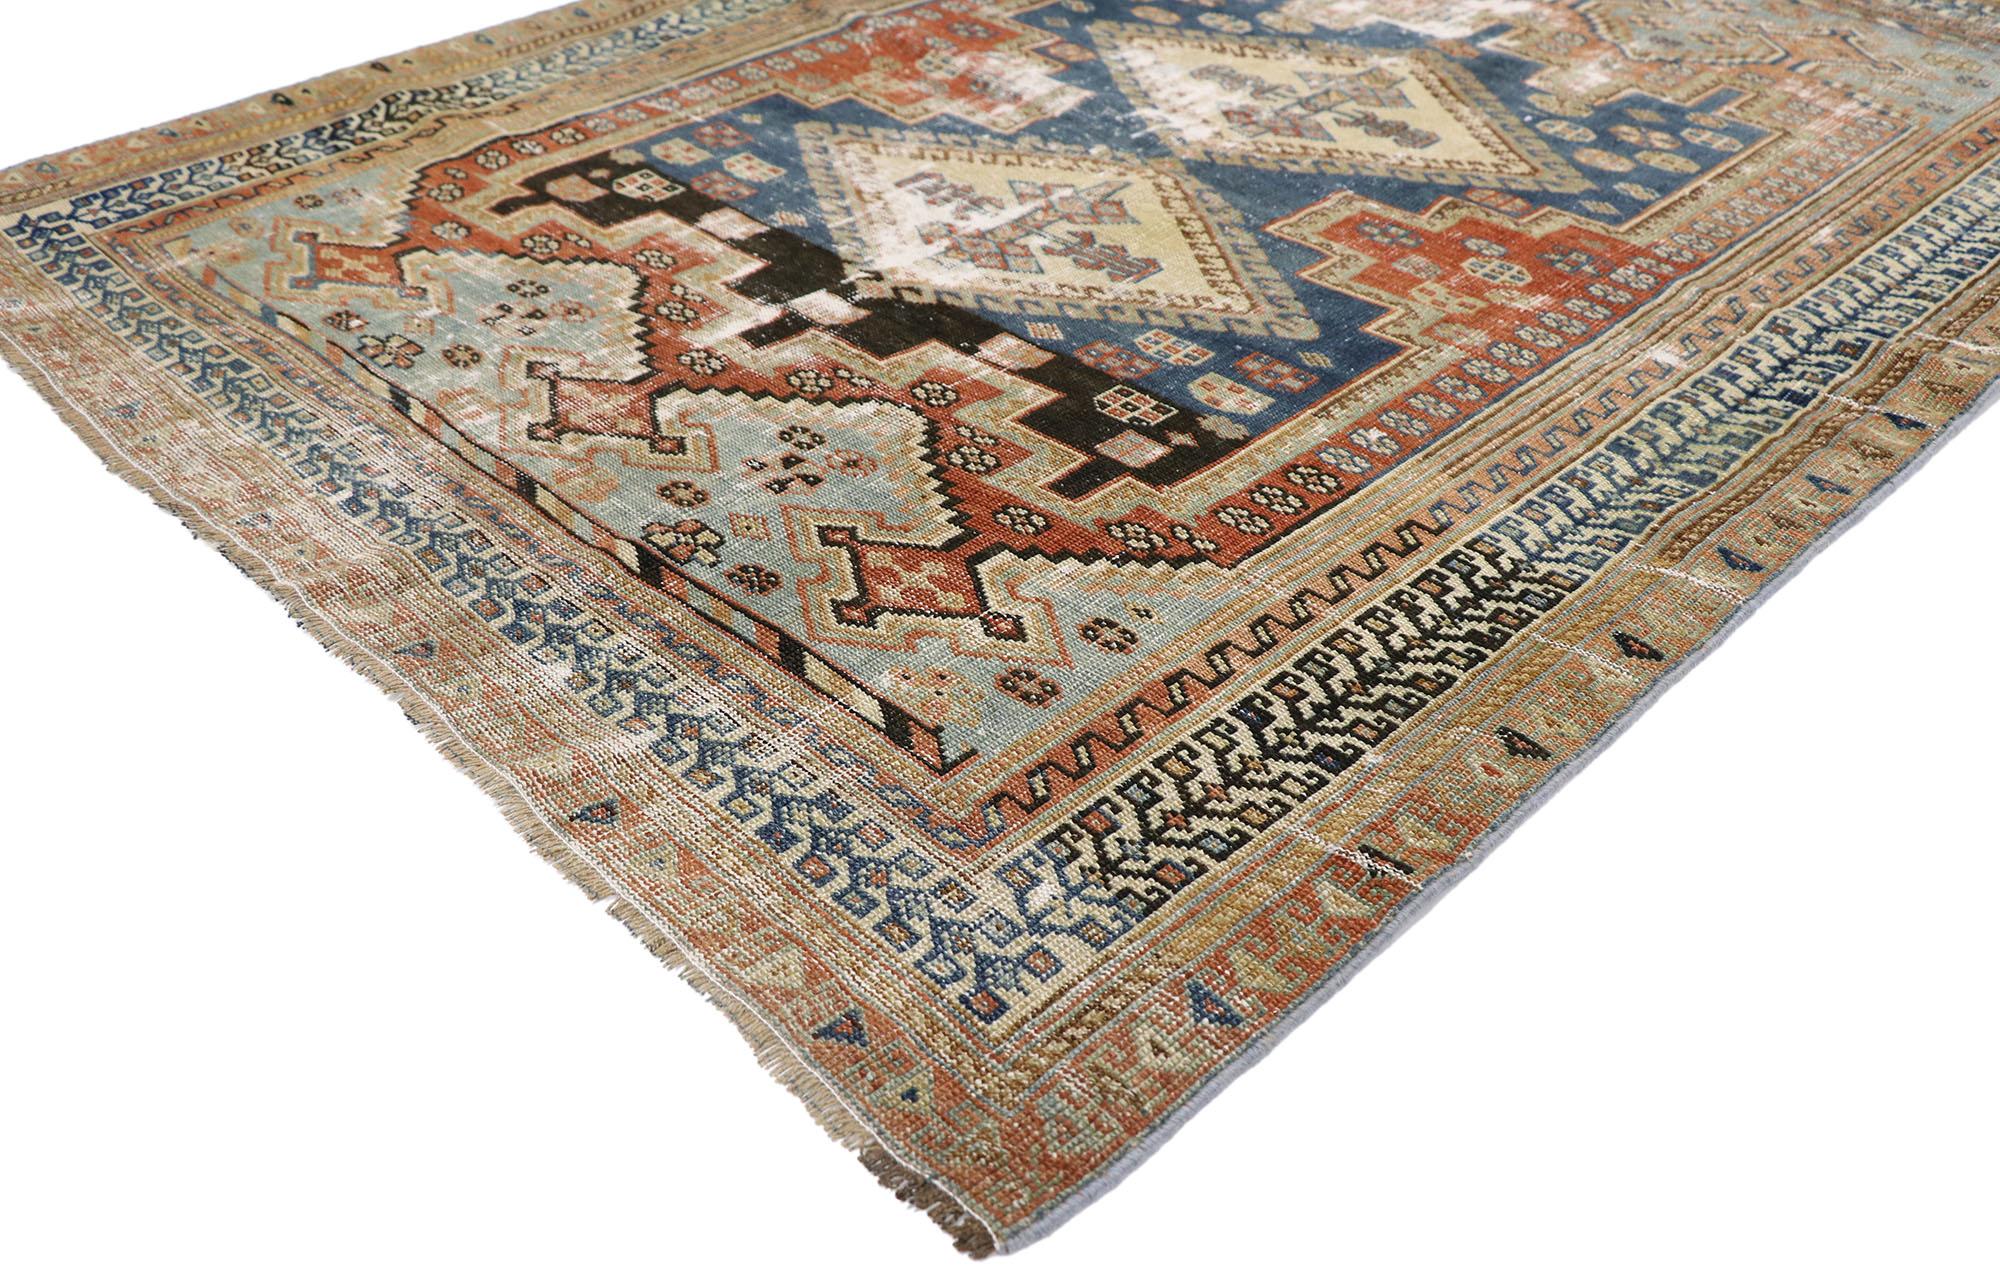 60897, distressed antique Persian Shiraz rug with Modern Rustic Tribal style. Emanating sophistication and nomadic charm with rustic sensibility, this hand knotted wool distressed antique Persian Shiraz rug beautifully embodies a modern tribal